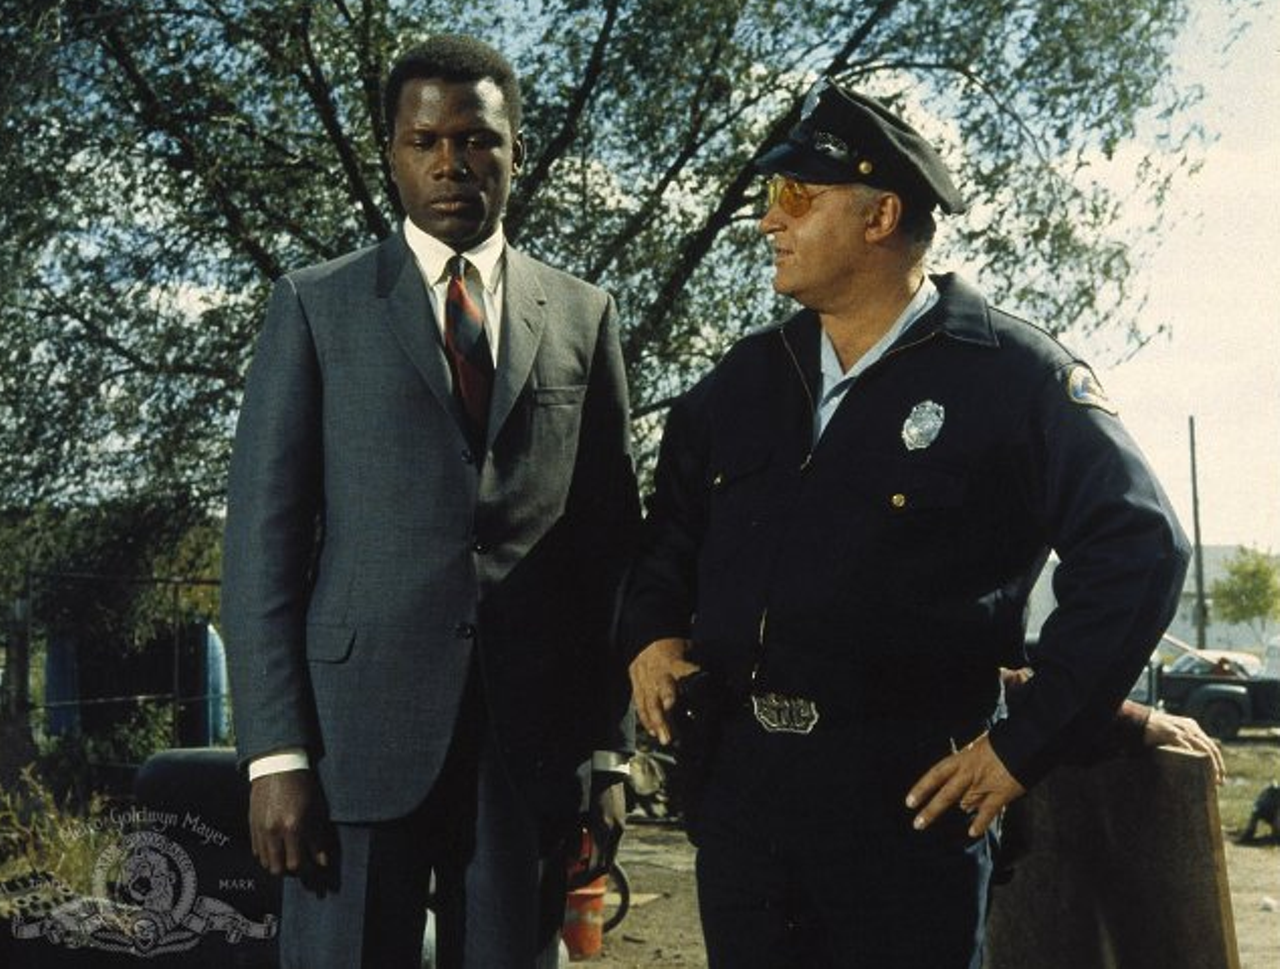 In the Heat of the Night (1967)
A winner of five Academy Awards -- but not one for Sidney Poitier's powerful performance -- In the Heat of the Night pairs Poitier's Detective Virgil Tibbs with Rod Steiger's Police Chief Bill Gillespie. "Now just what do you do up there in Pennsylvania to earn that kind of money?" asks an incredulous Gillespie about money found on Tibbs, to which Tibbs responds, "I'm a police officer." The two work together to solve a murder, but only after Tibbs' police chief back in Philadelphia tells him to stay in Mississippi to solve the crime.